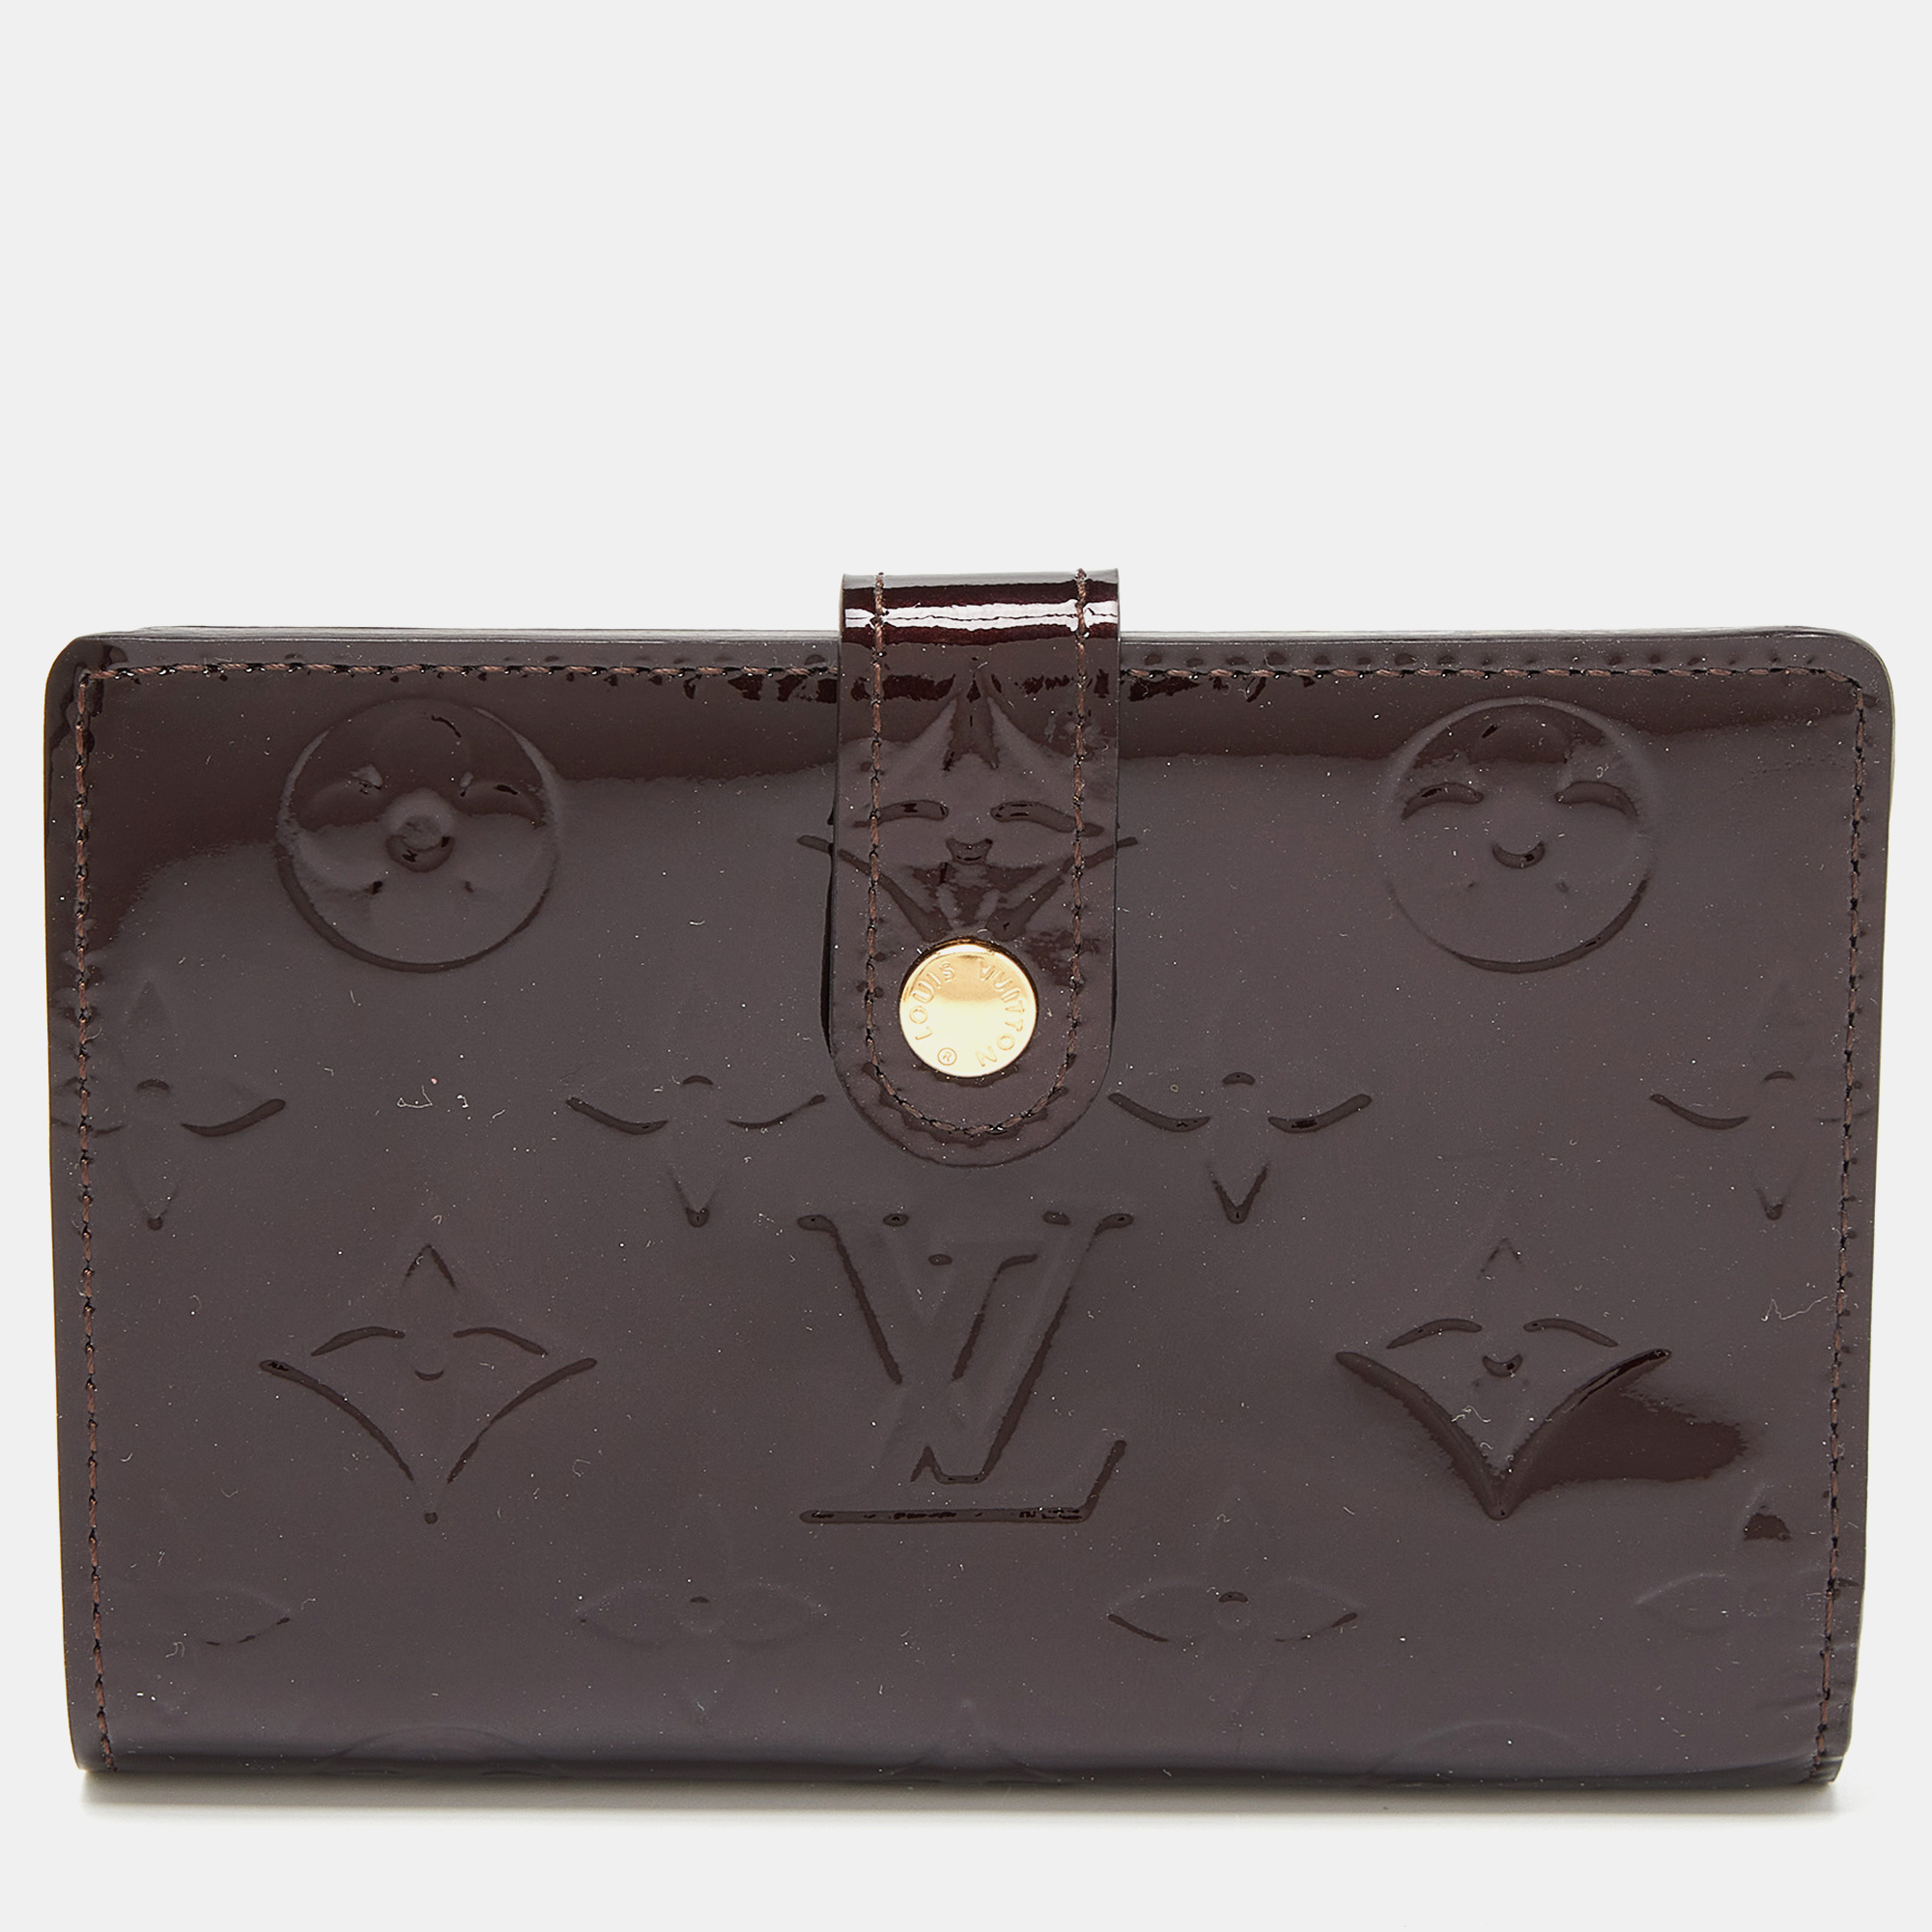 Pre-owned Louis Vuitton Amarante Monogram Vernis French Wallet In Burgundy